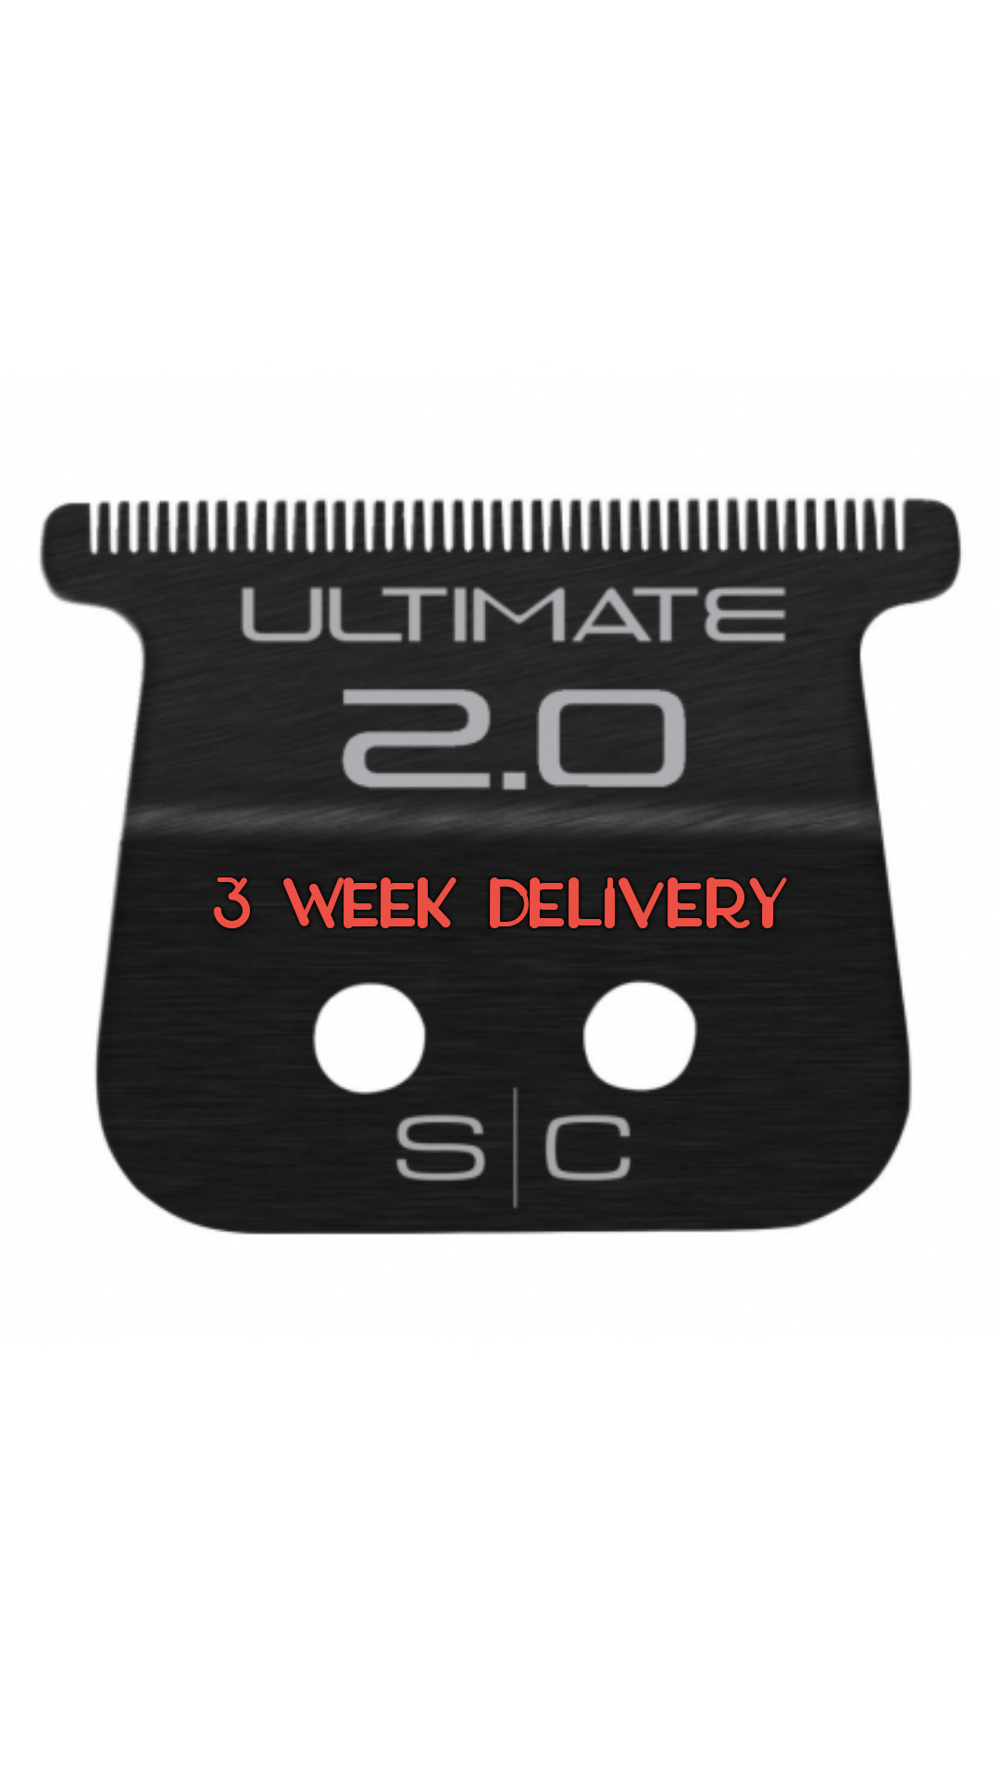 Image of (3 Week Delivery) Stylecraft Ultimate DLC 2.0 Modified Blade